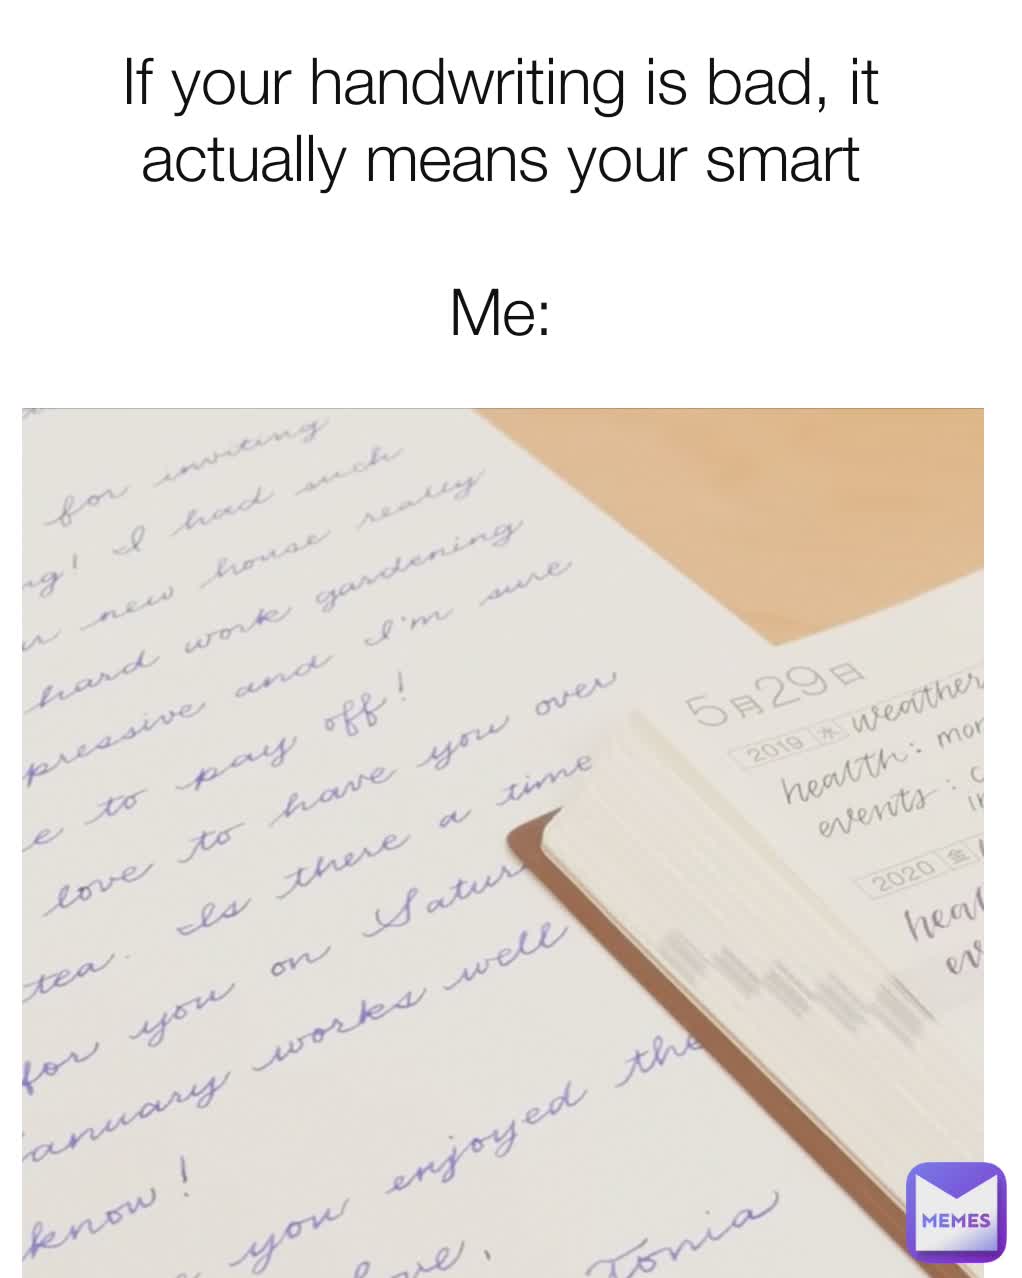 If your handwriting is bad, it actually means your smart

Me: